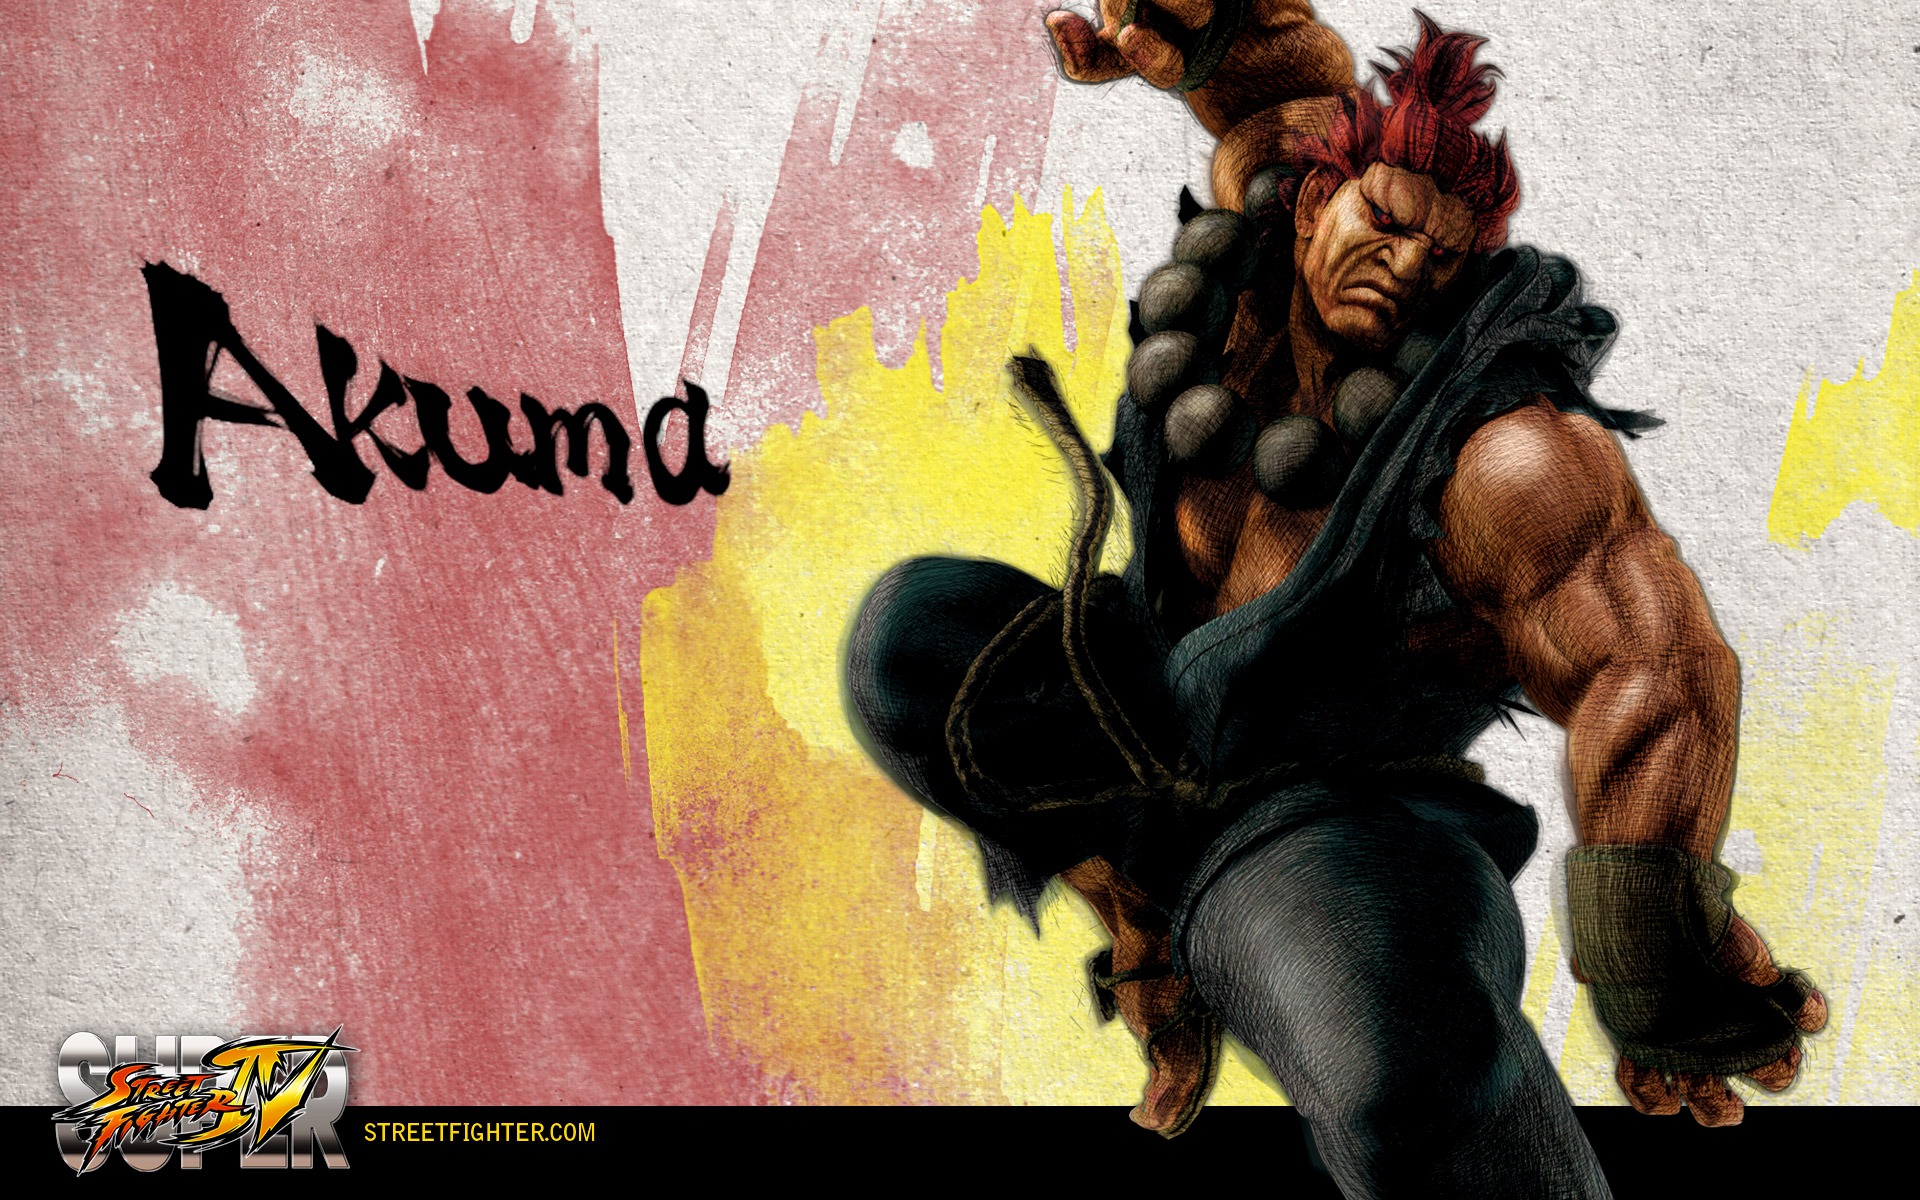 Super Street Fighter 4 Ink Chinese style wallpaper #4 - 1920x1200